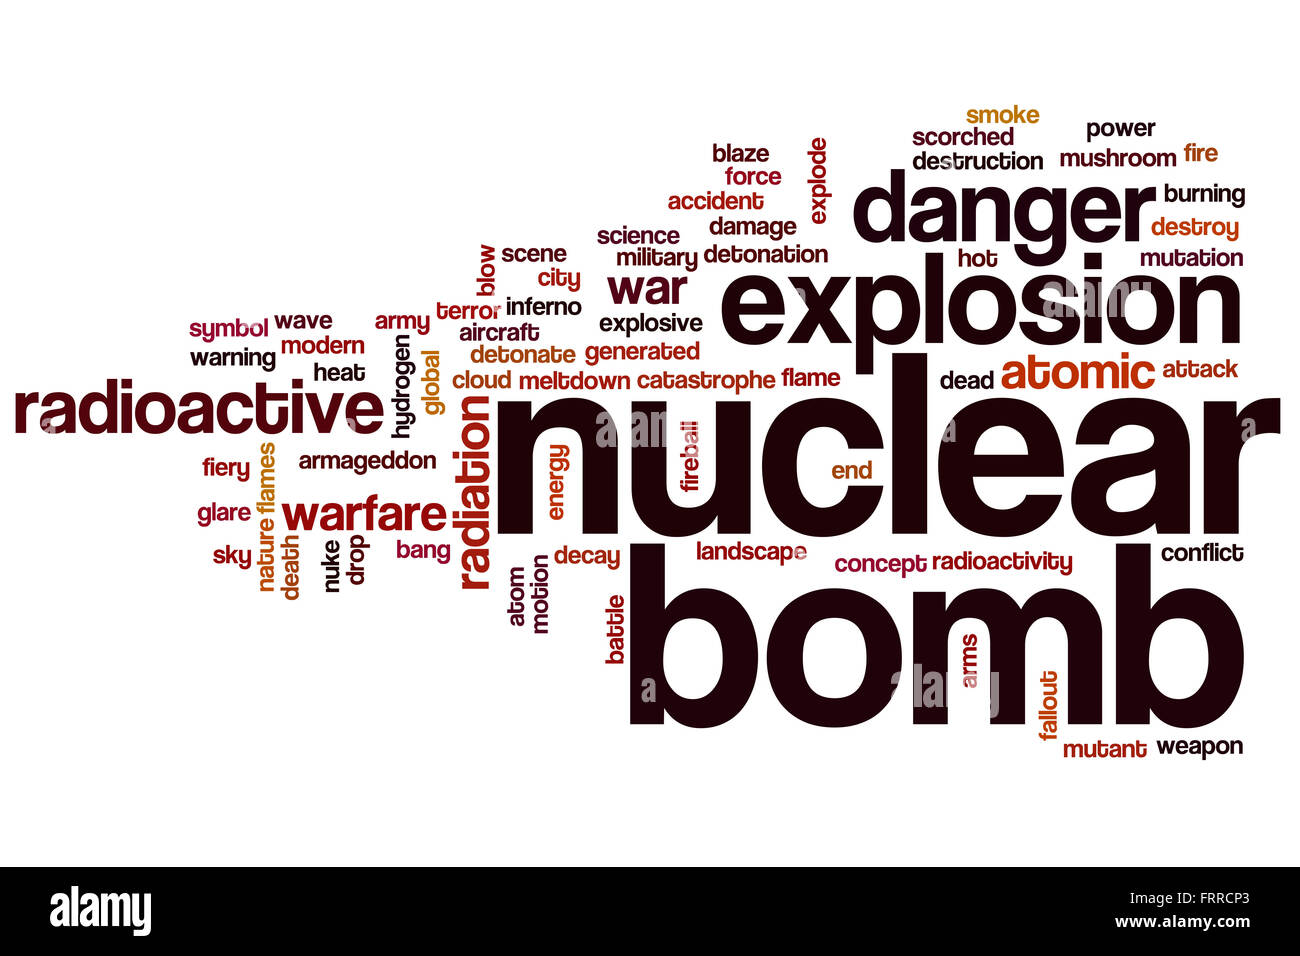 Nuclear bomb word cloud concept with explosion radioactive related tags Stock Photo